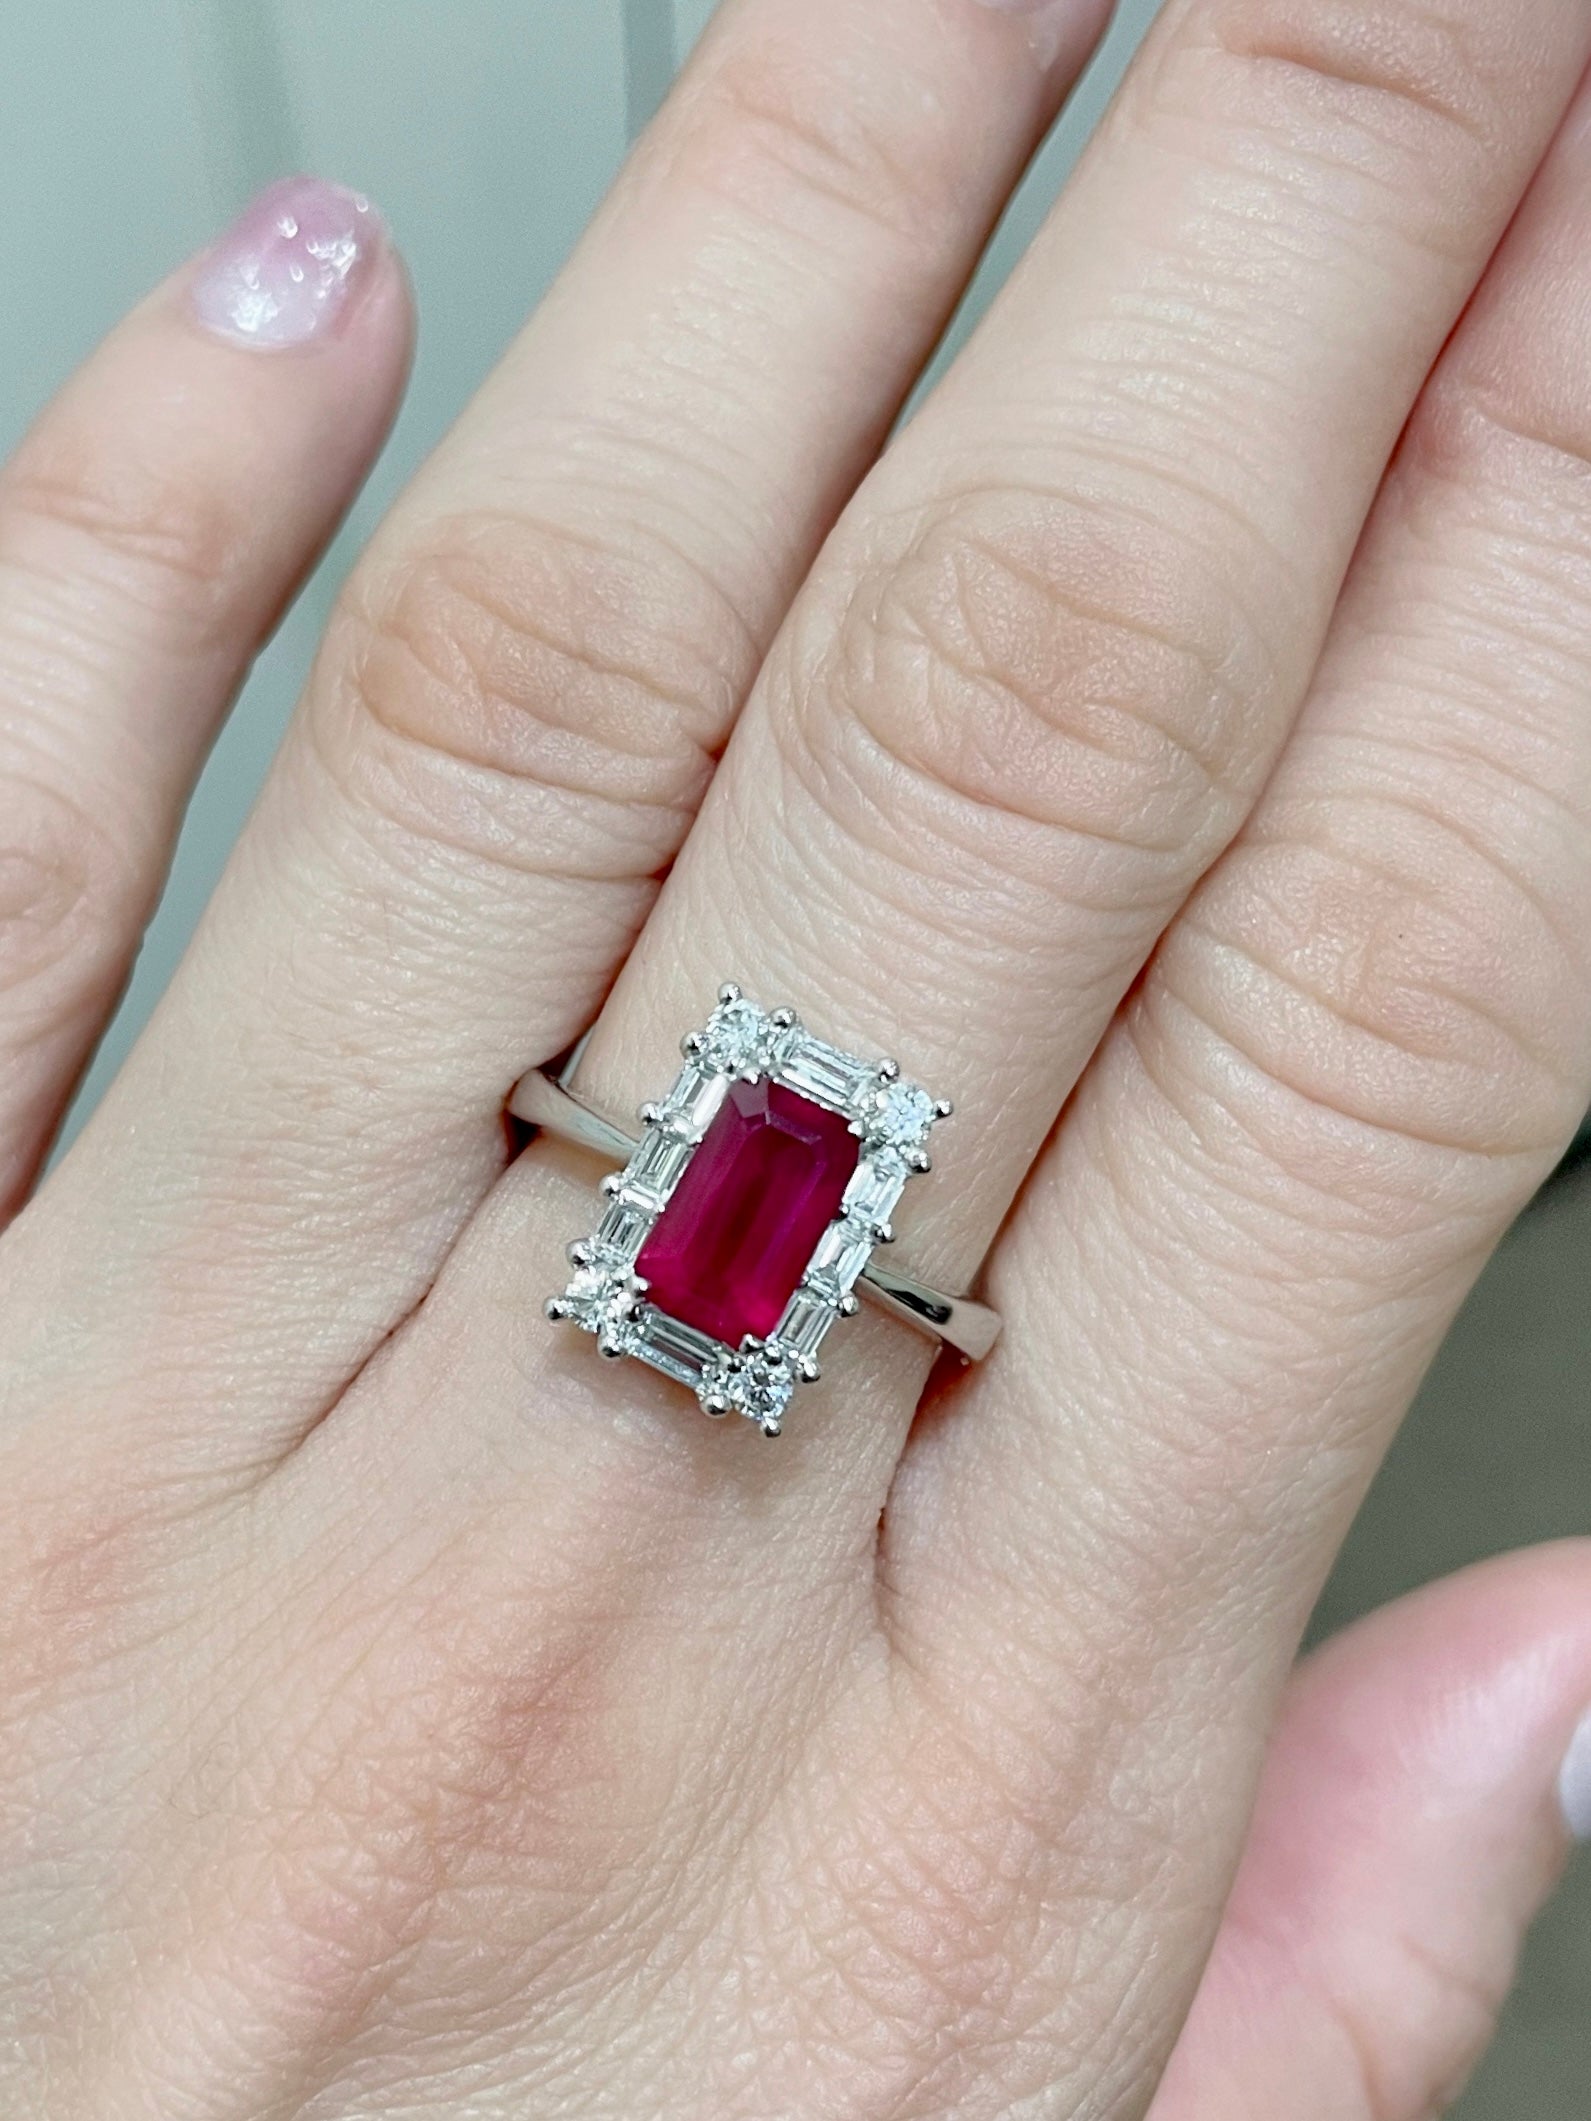 Oval Cut Natural Ruby Engagement Ring from Black Diamonds New York